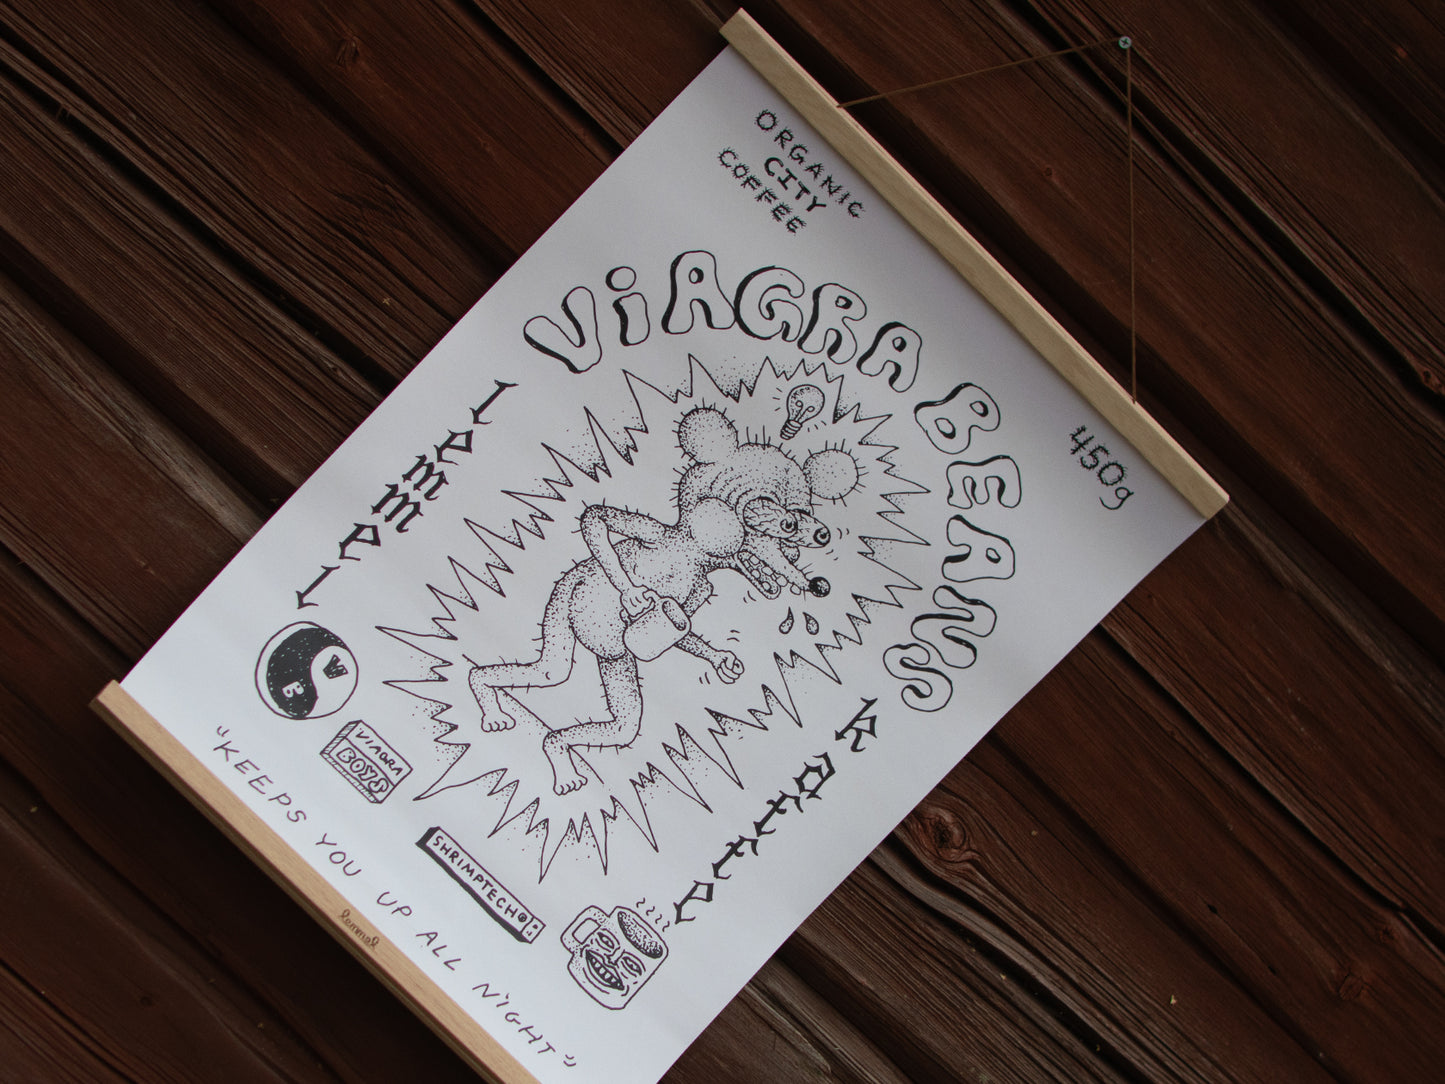 Poster "Viagra beans - "keeps you up all night" A2